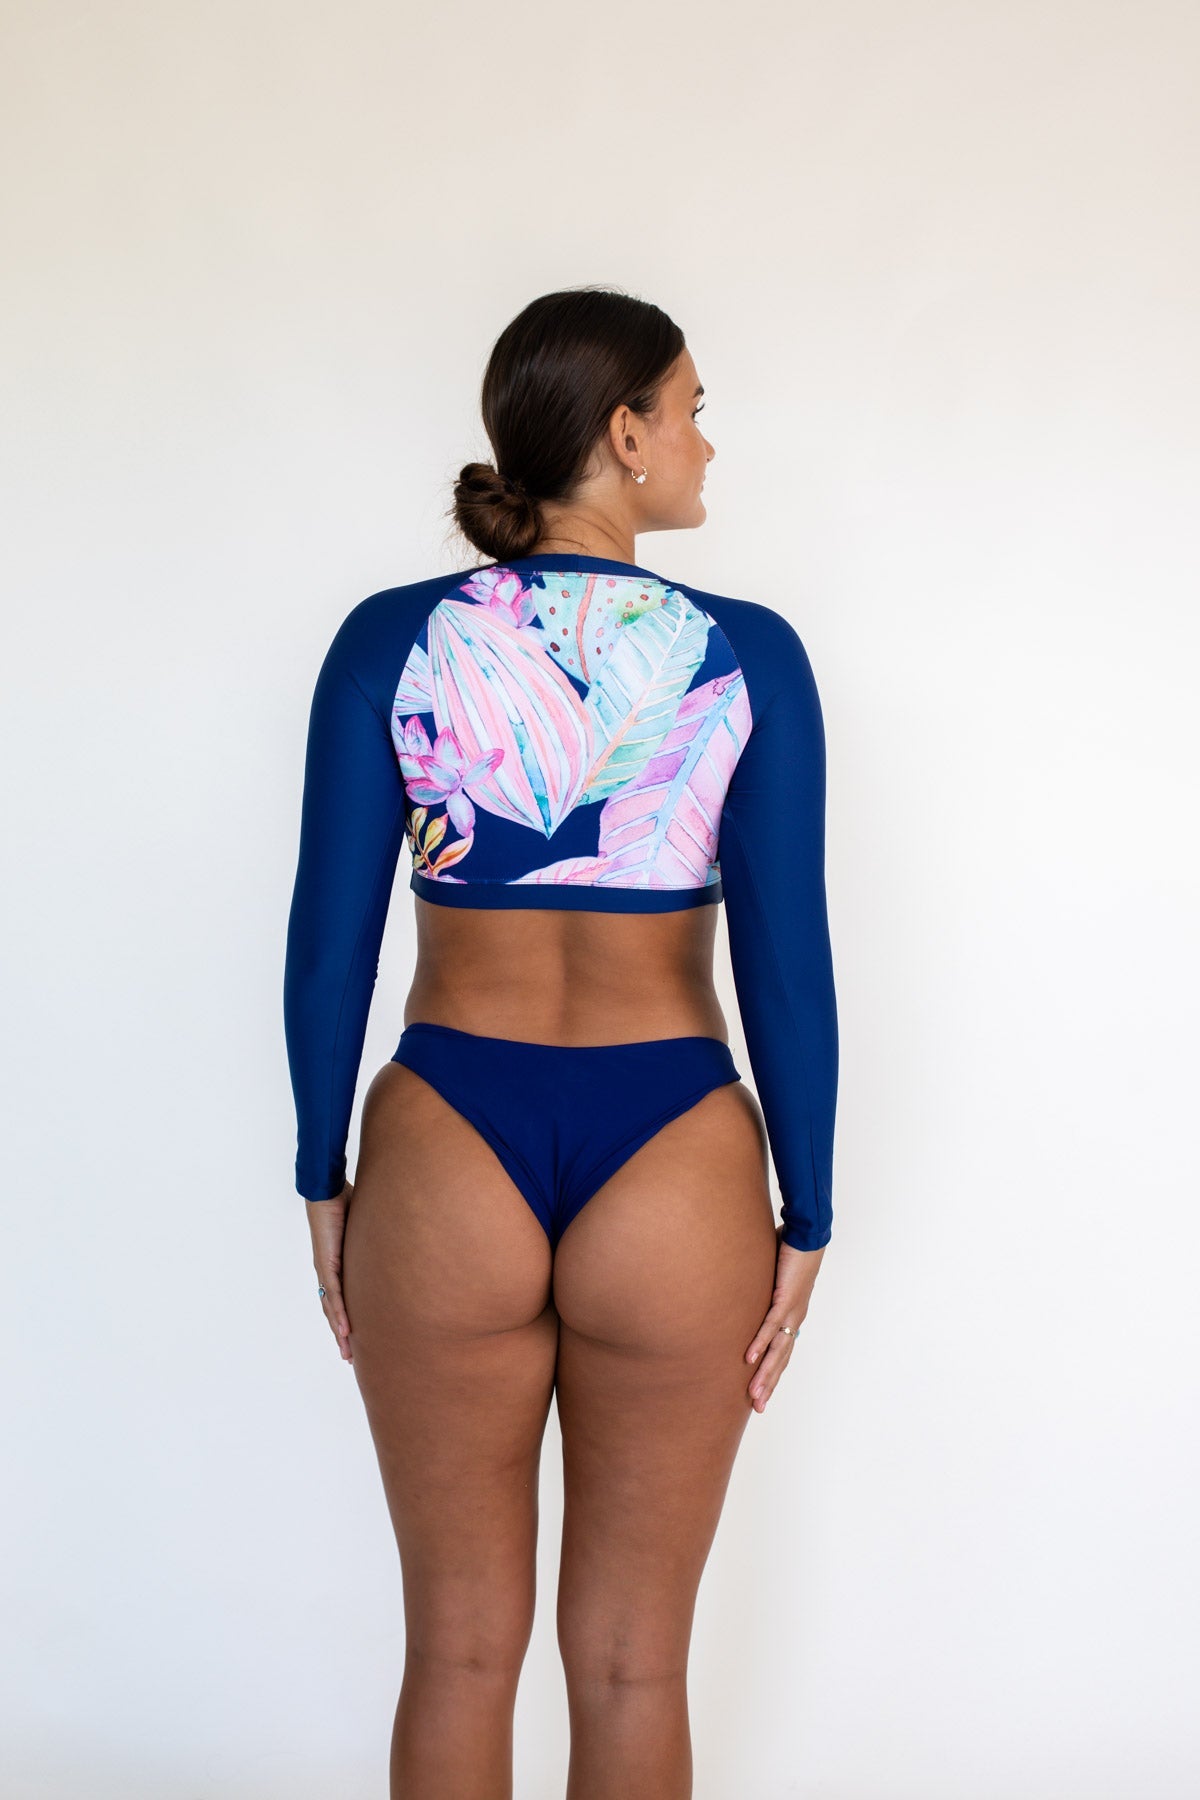 Rash guard top for surfing